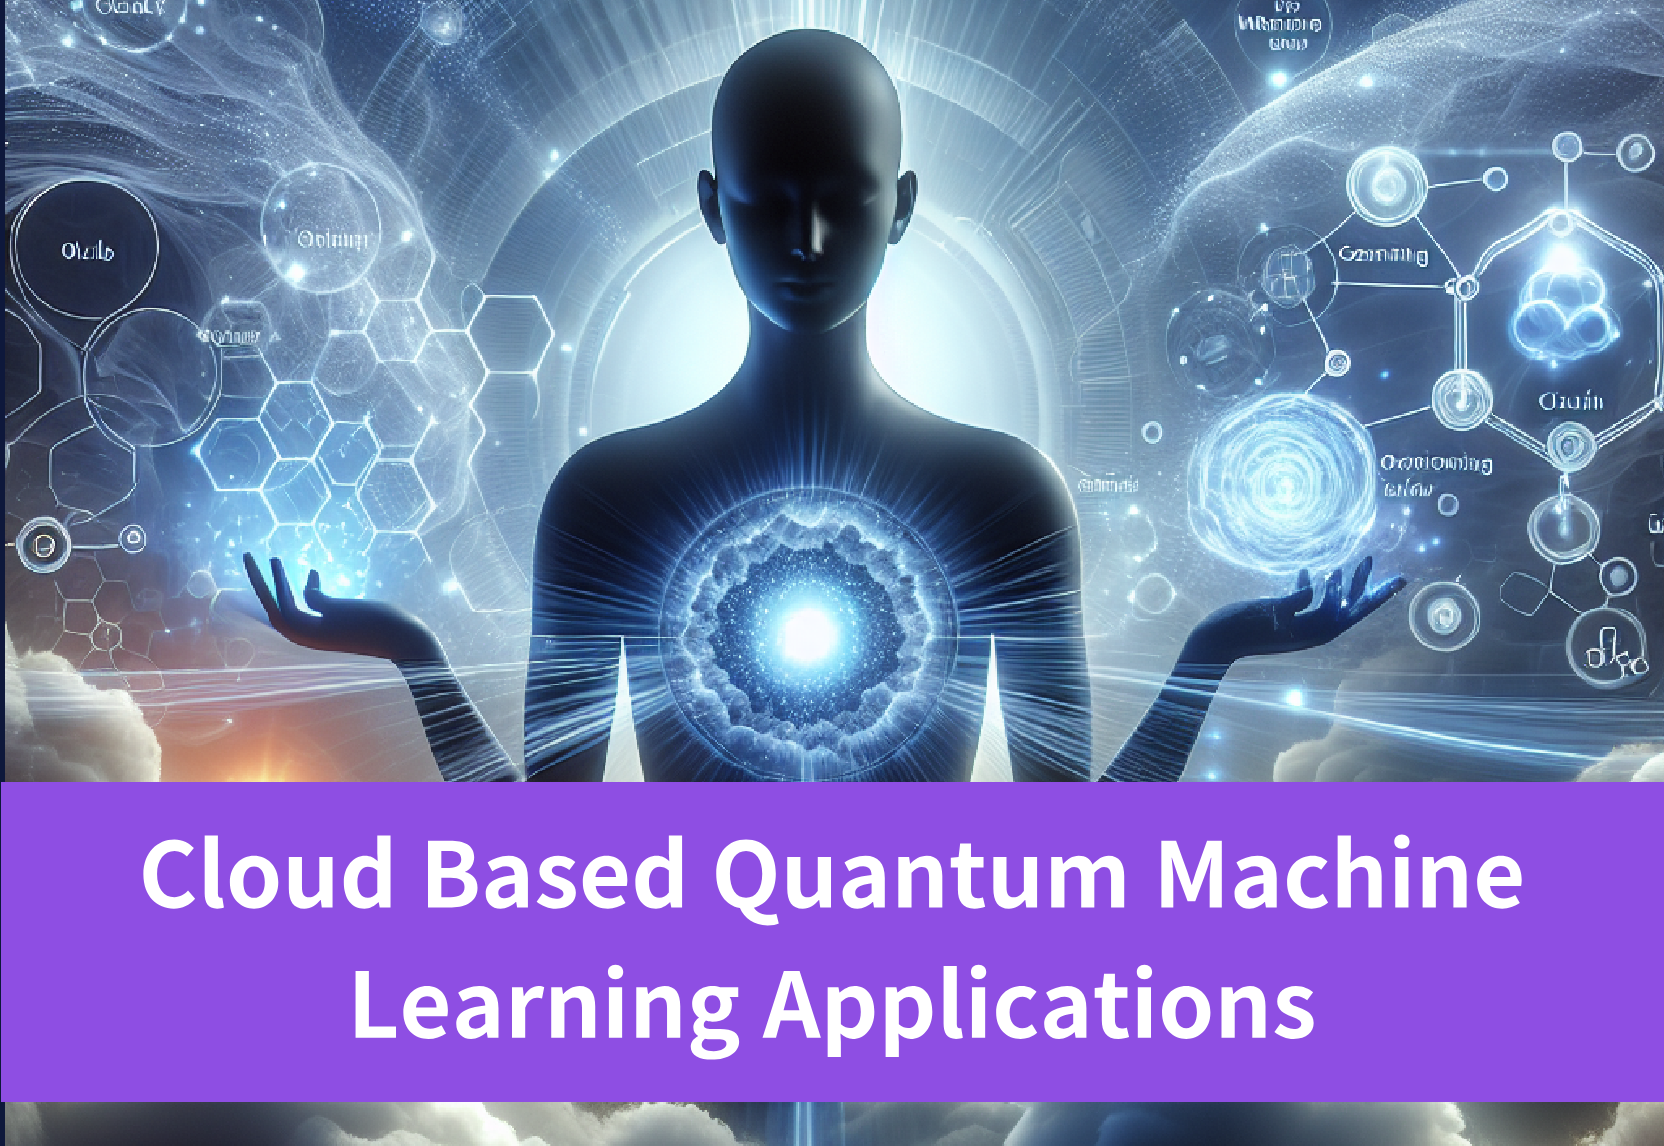 Mastering Cloud-Based Quantum Machine Learning Applications